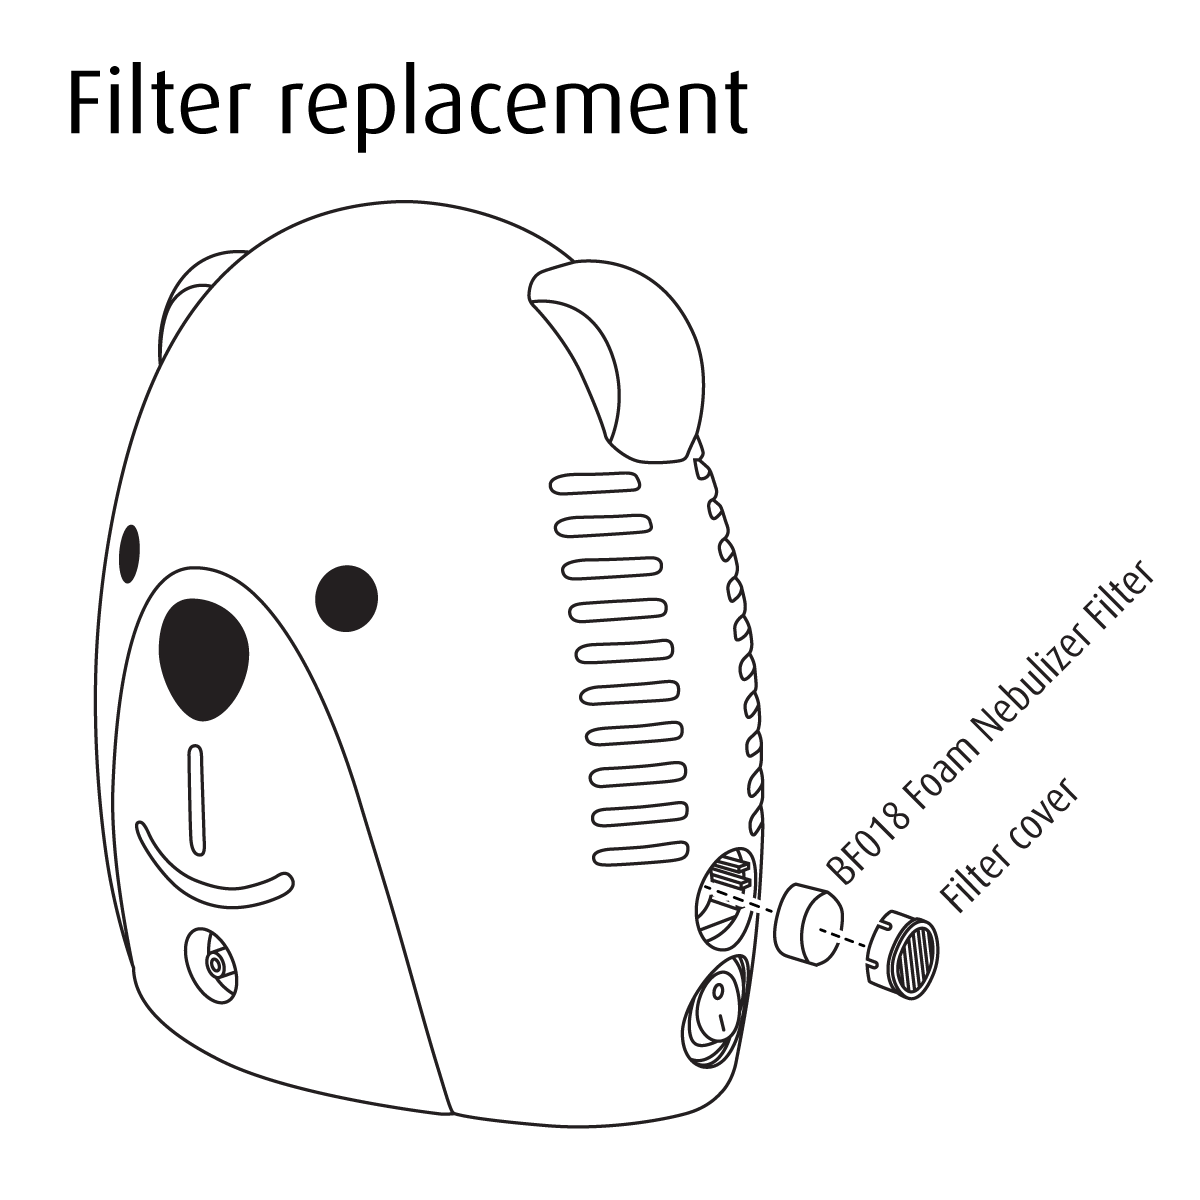 Filter replacement for NEB300BEAR. The filter holster is located above the power switch.